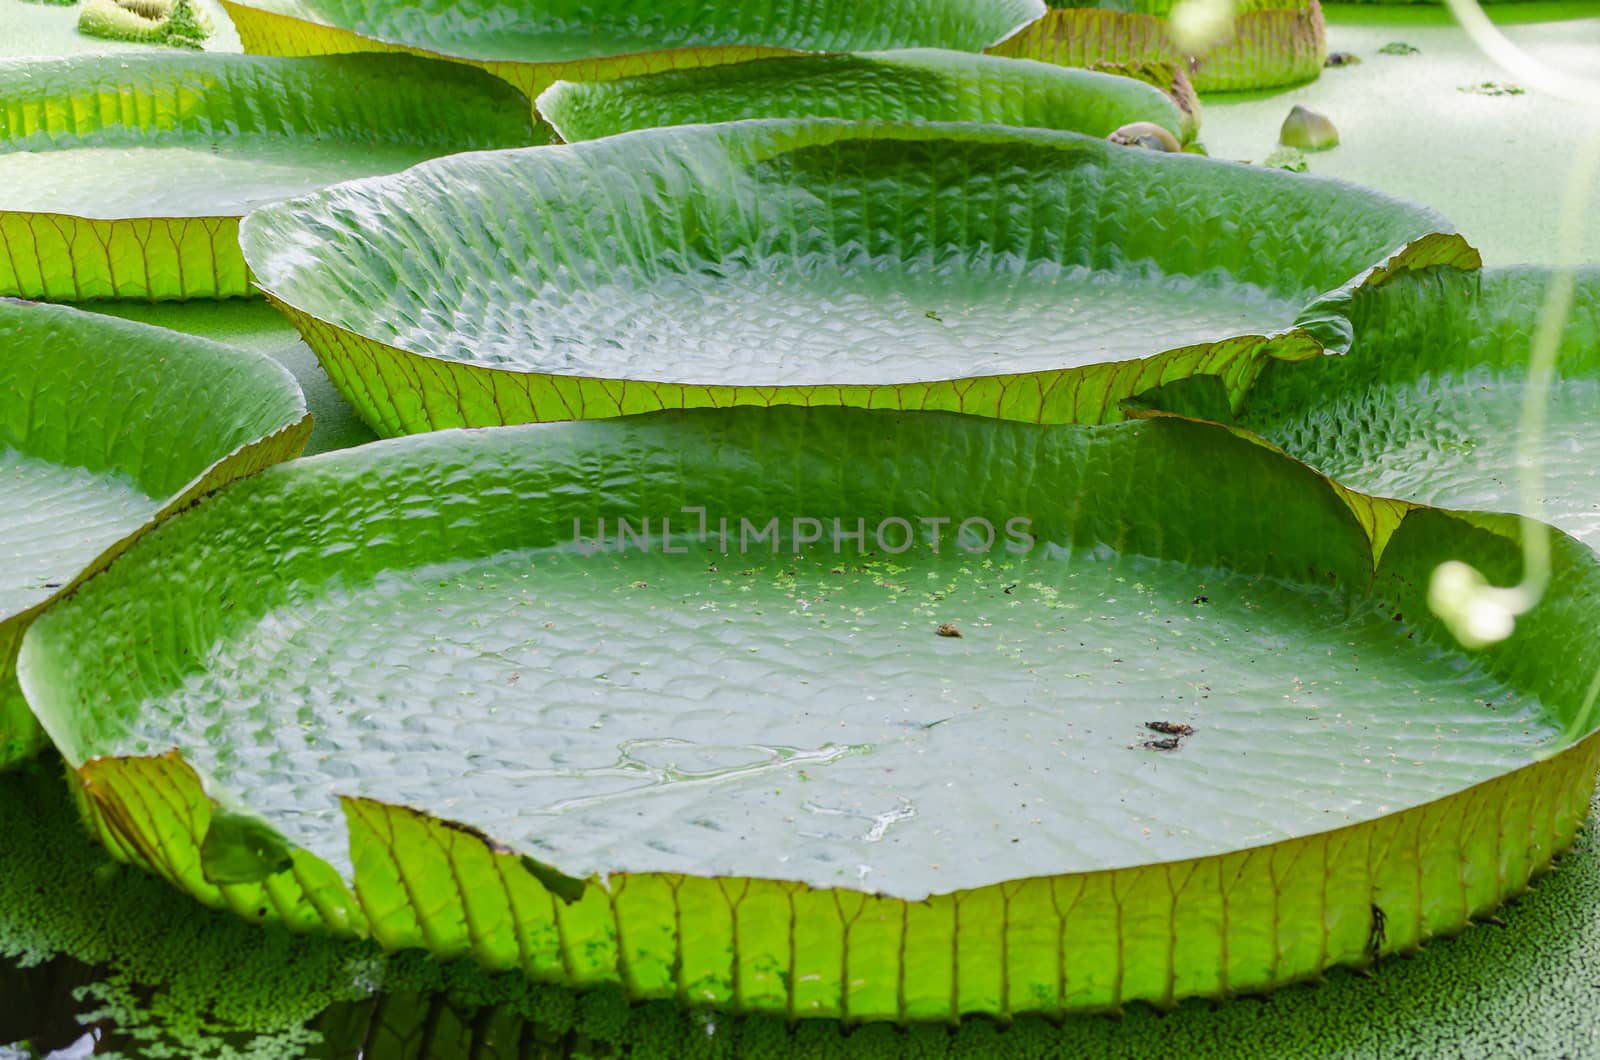 Large sheet of a water lily plant.